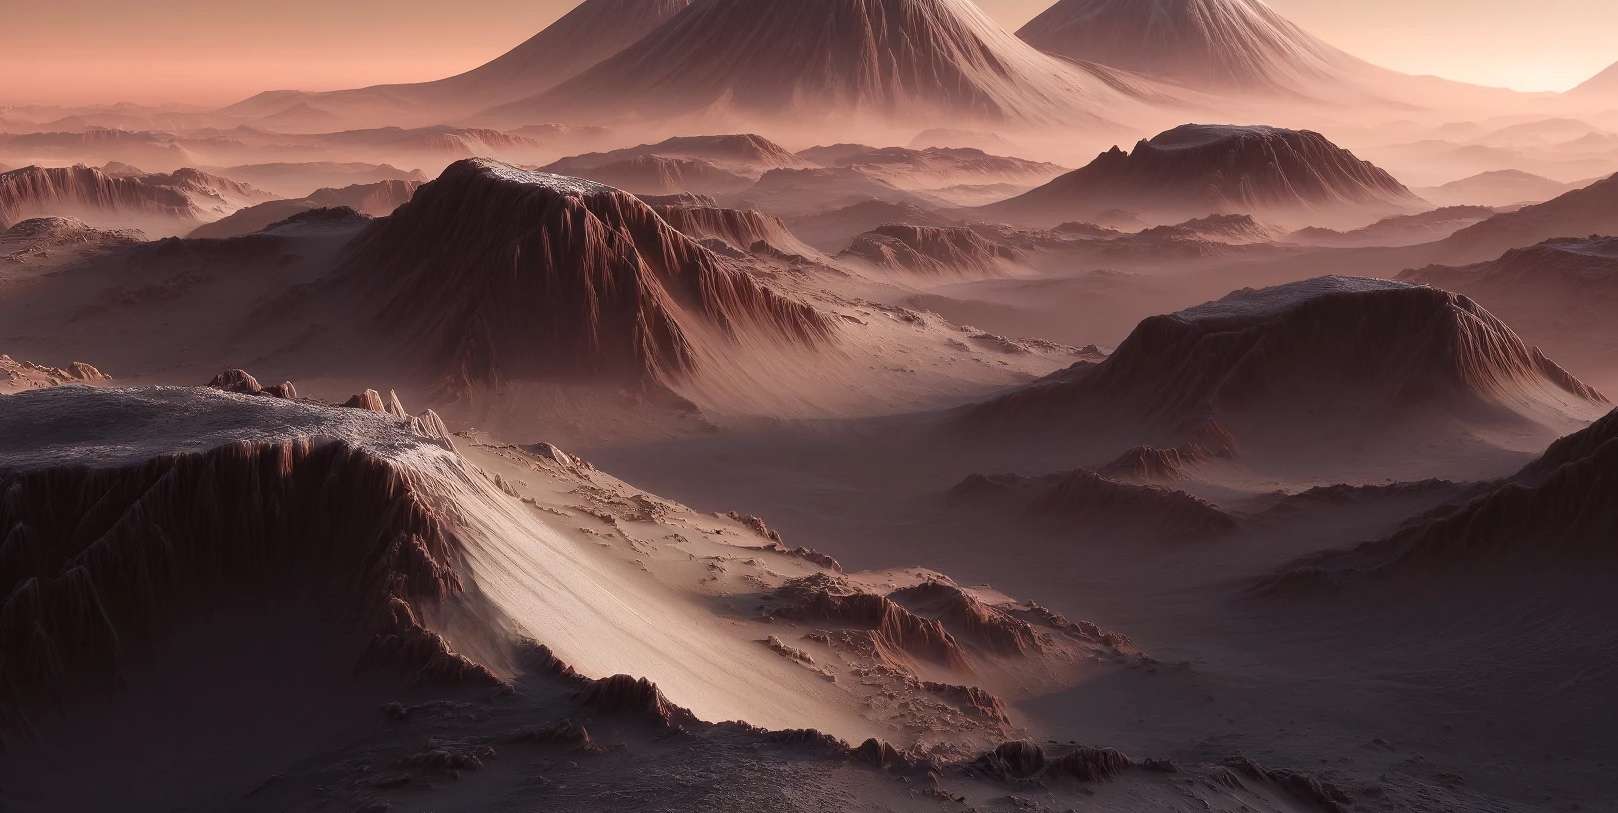 Discovering the “impossible” presence of frost on the mountains of Mars!